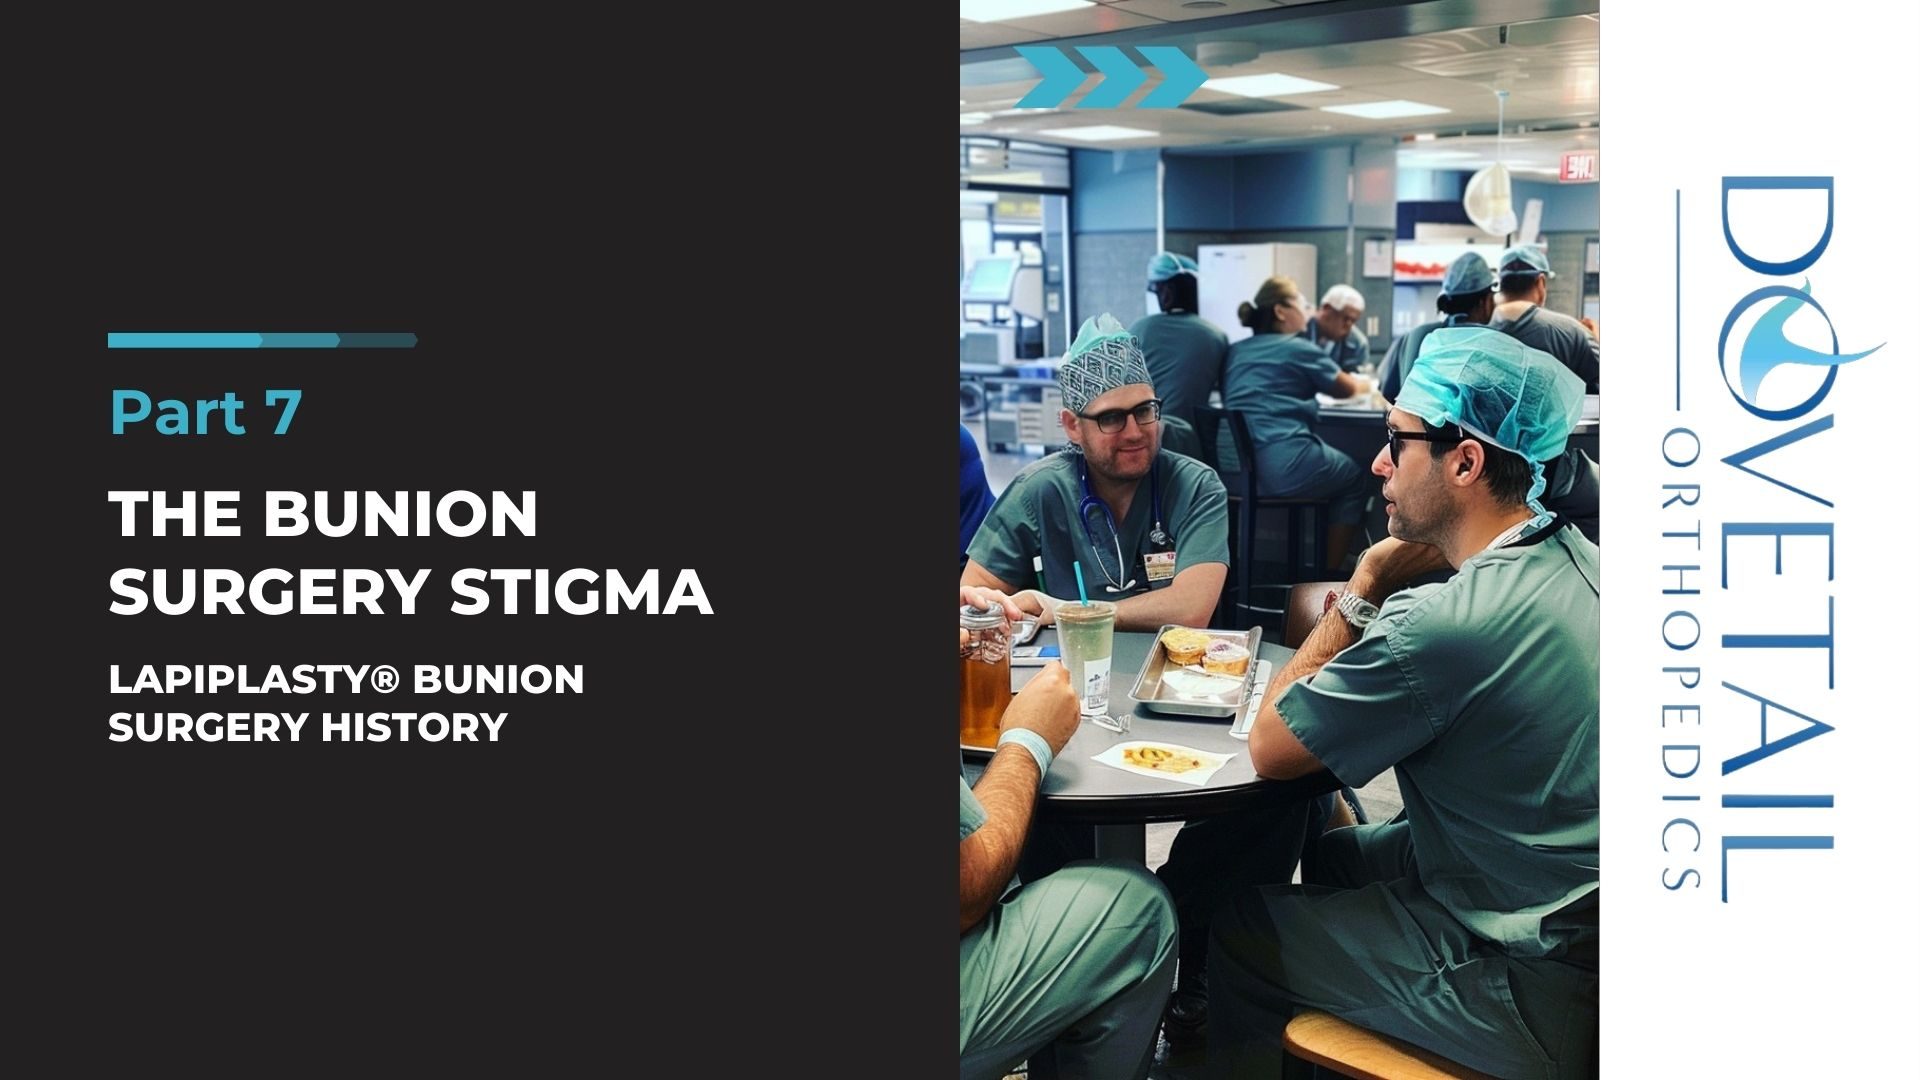 Medical professionals discussing in a hospital break room with text overlay: Part 7 - The Bunion Surgery Stigma, Lapiplasty® Bunion Surgery History. Logo of DoveTail Orthopedics on the right